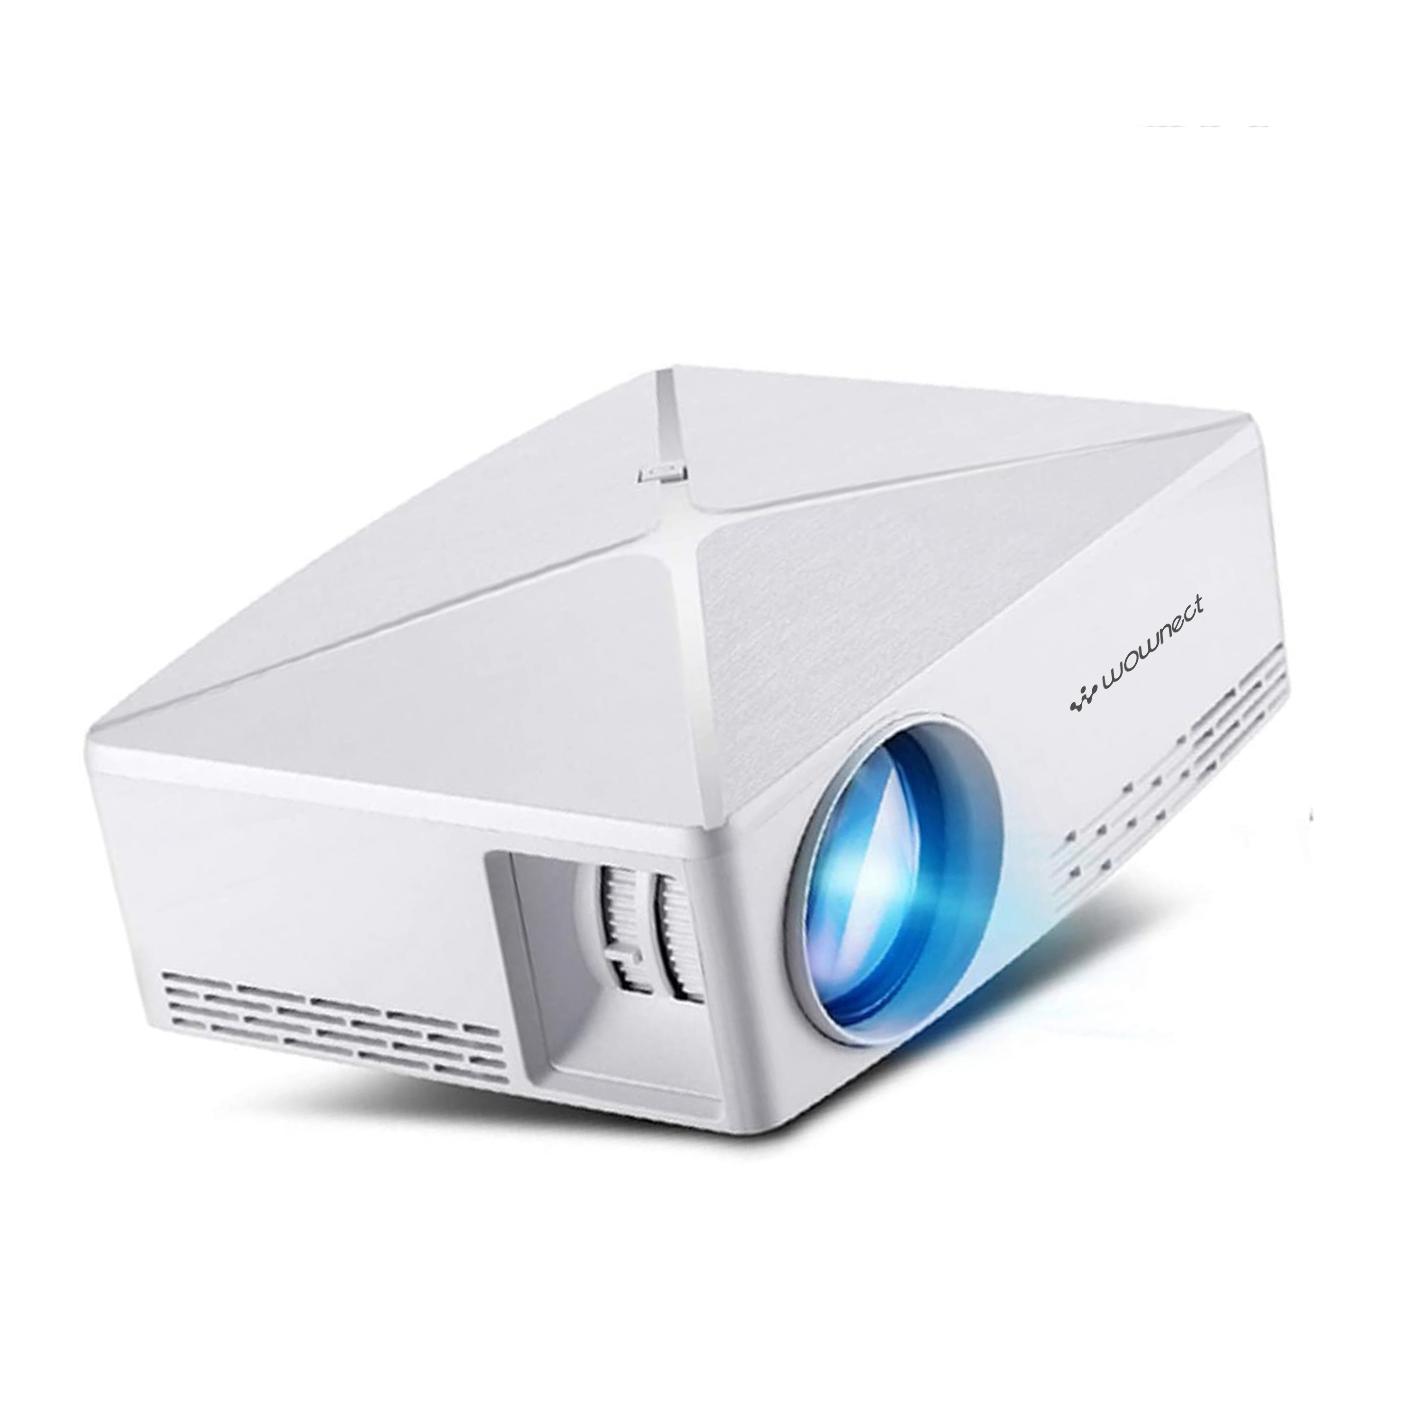 Wownect C80 Home Theatre Projector 4K LED 2200Lumens Portable HD Gaming Projector 1280x720 [ Perfect for Home Cinema Entertainment ] [Image Size: 30 - 120 inch] - White - White